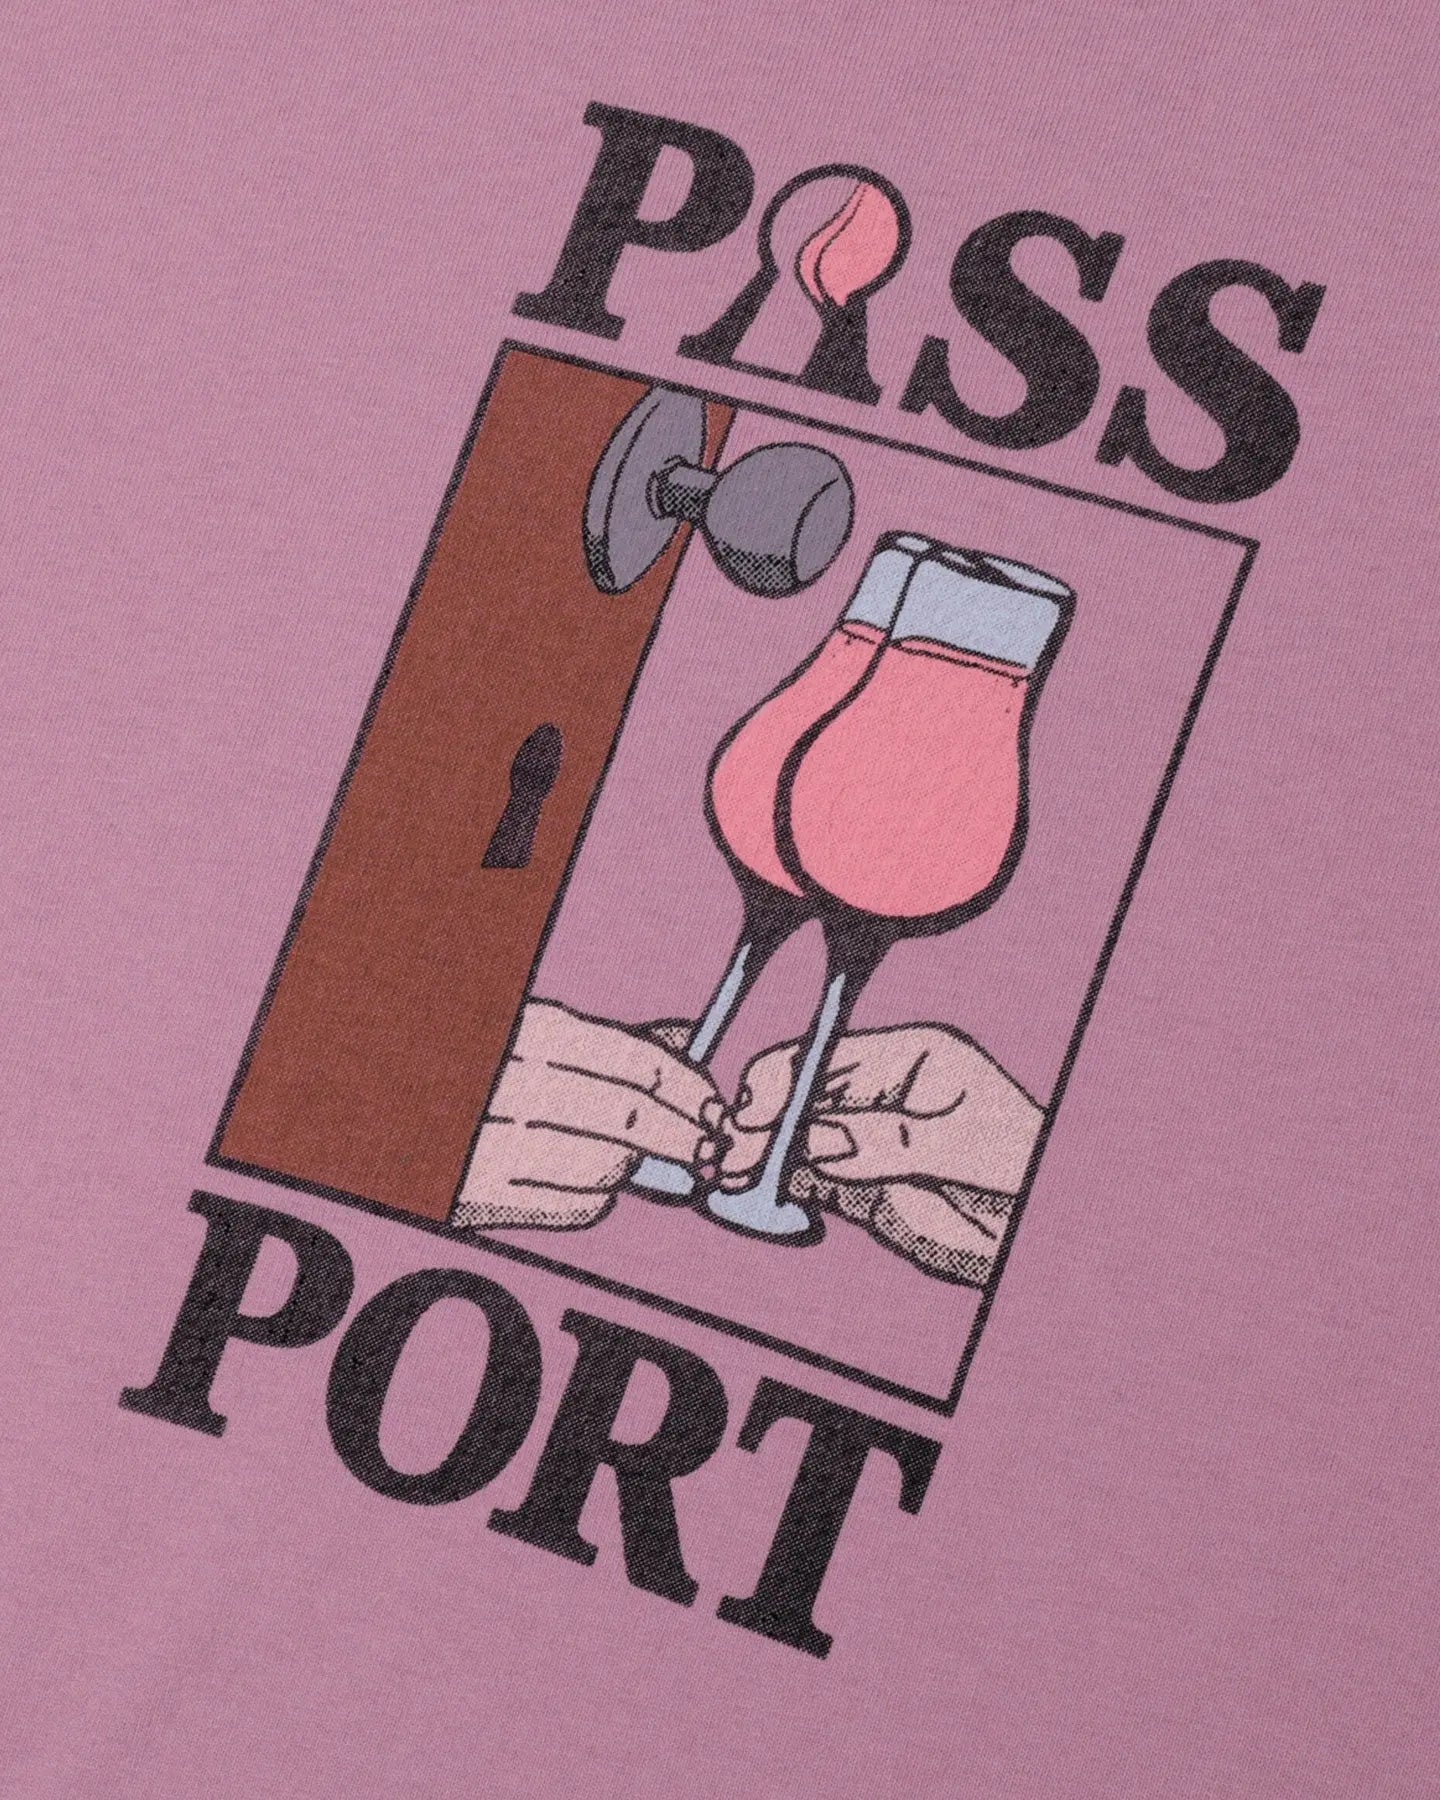 Pass Port What U Think U Saw SS Tee - Washed Berry SS Tees